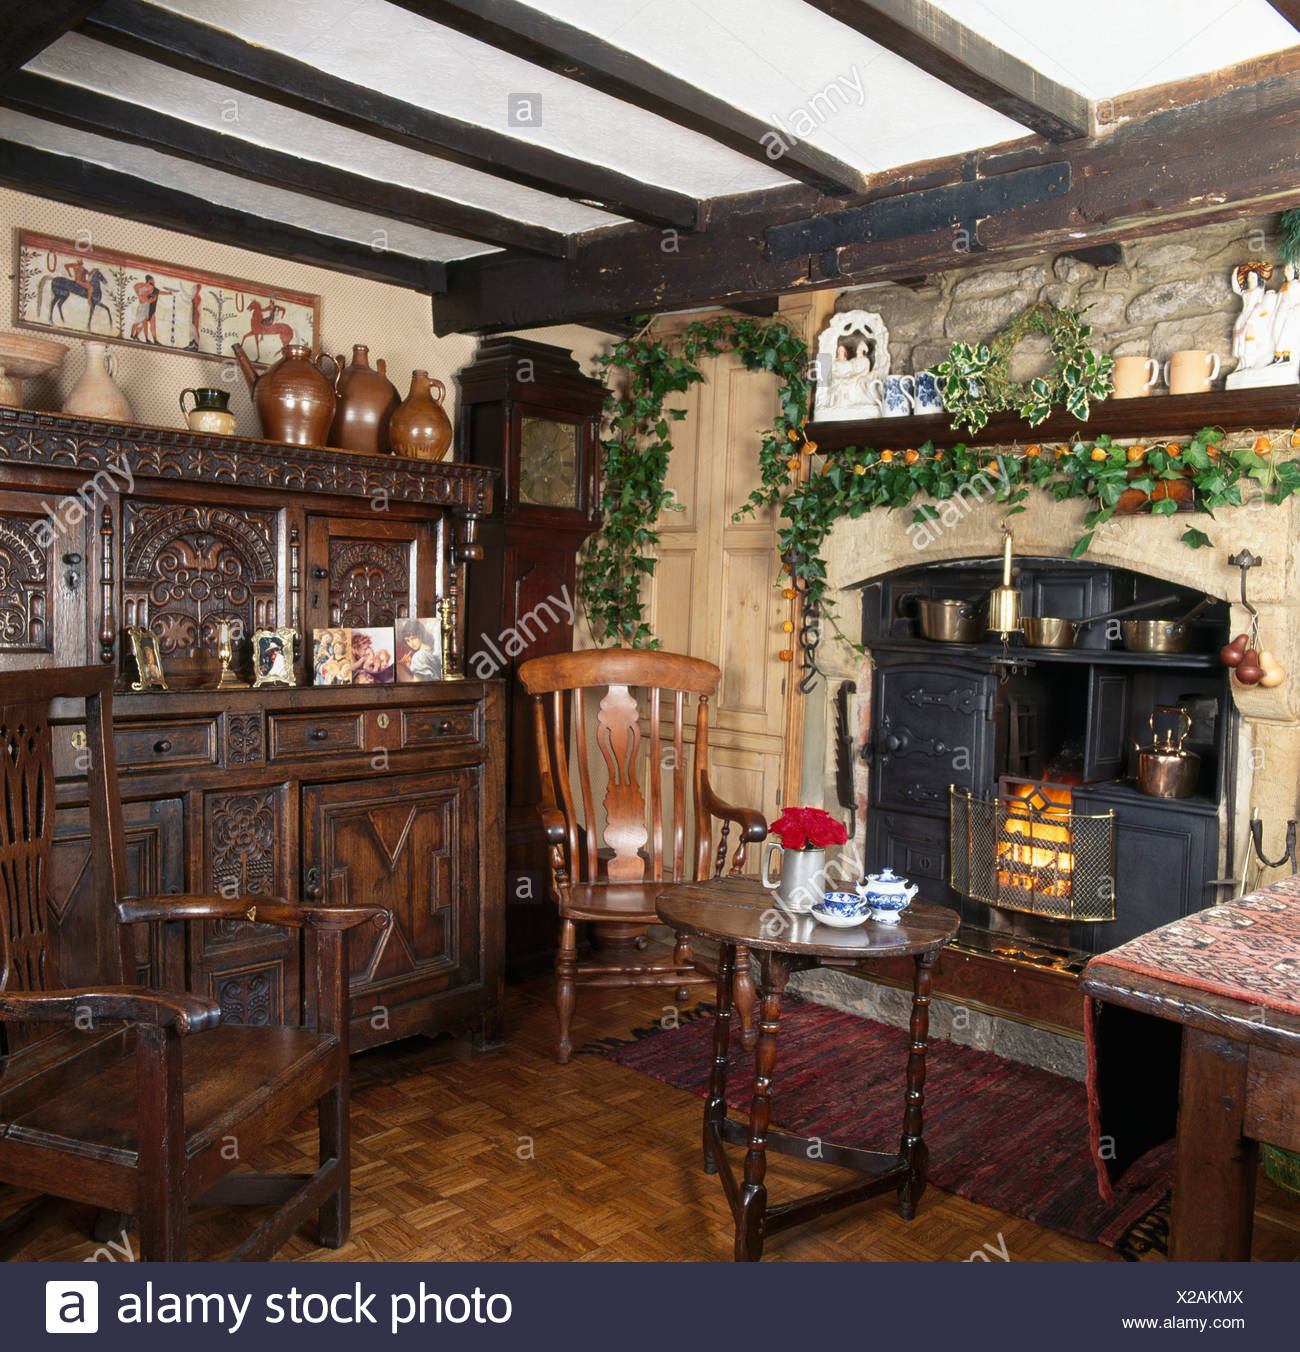 Ivy Christmas Garland Above Old Range In Country Dining Room